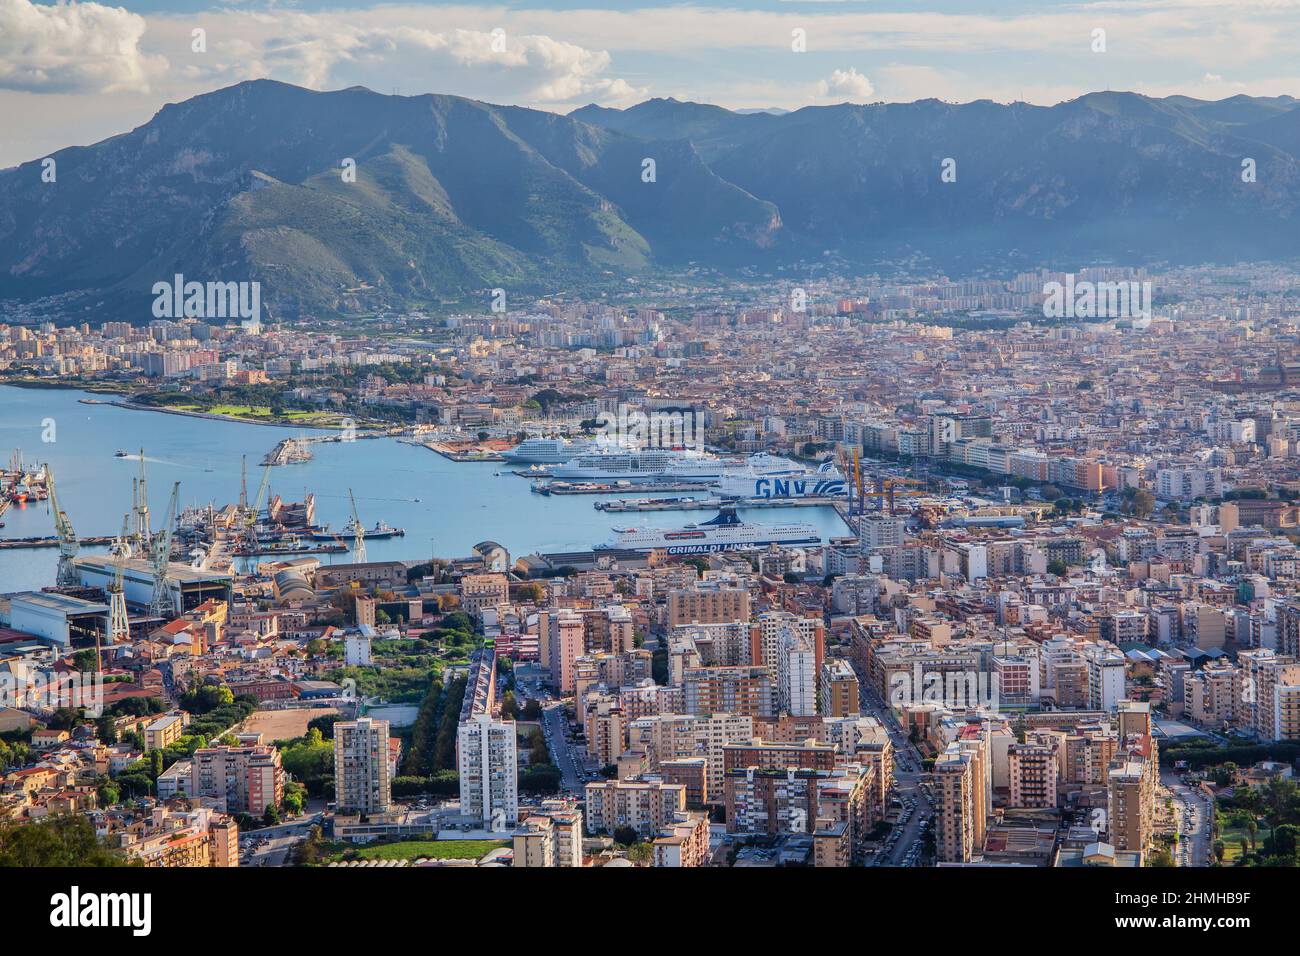 View of city and port, Palermo, Sicily, Italy Stock Photo